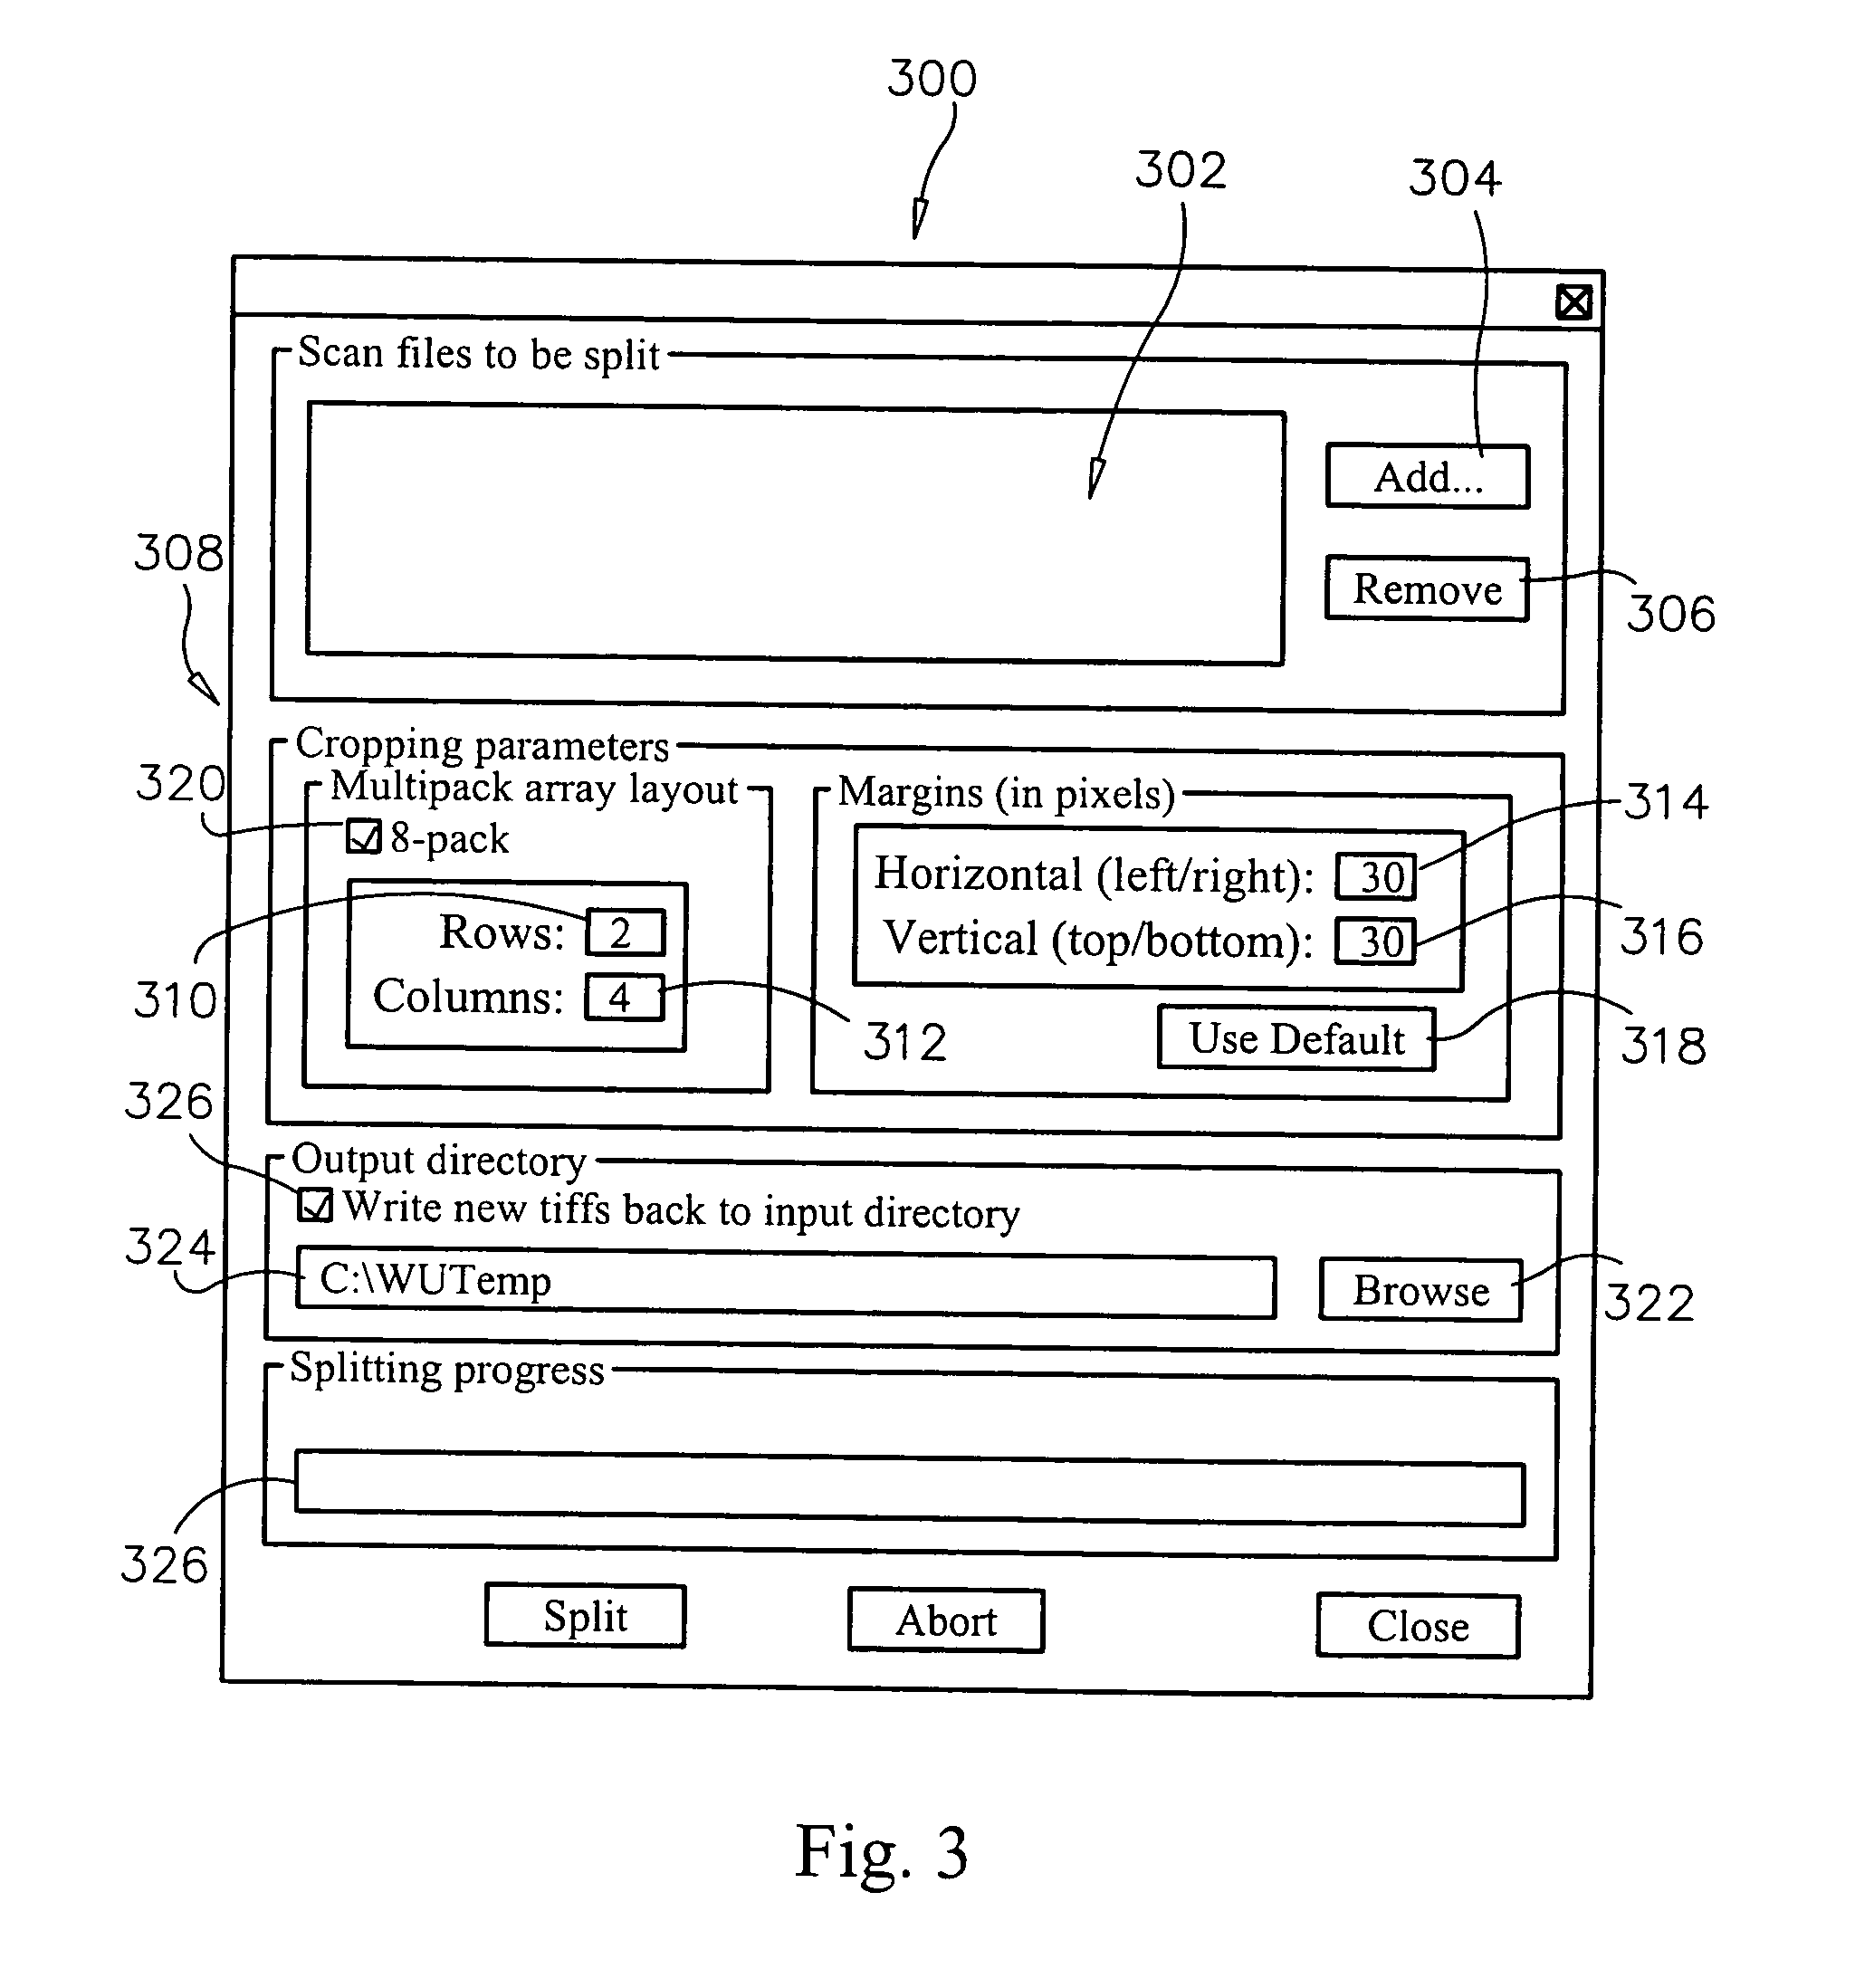 System and method of automated processing of multiple microarray images